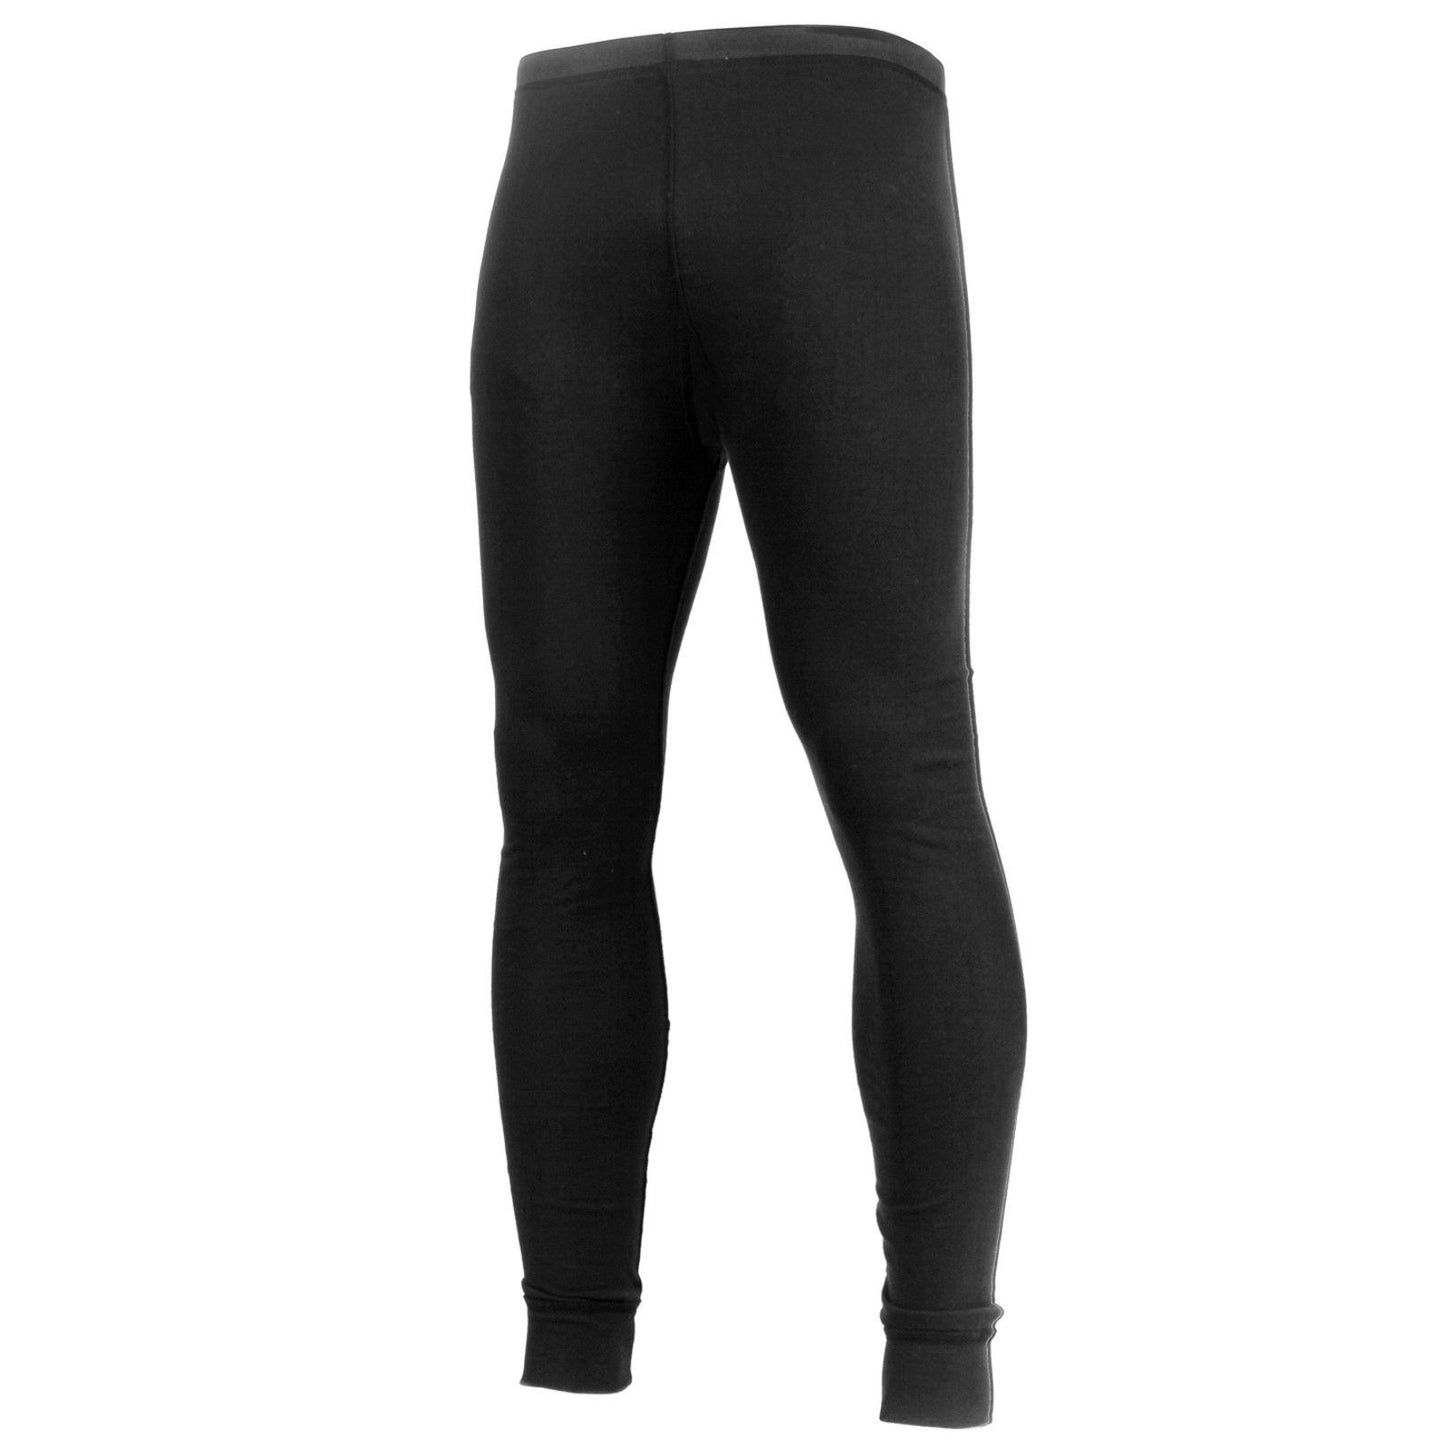 Men's Midweight Black Thermal Knit Bottom - Rothco Thermal Long Johns Underwear